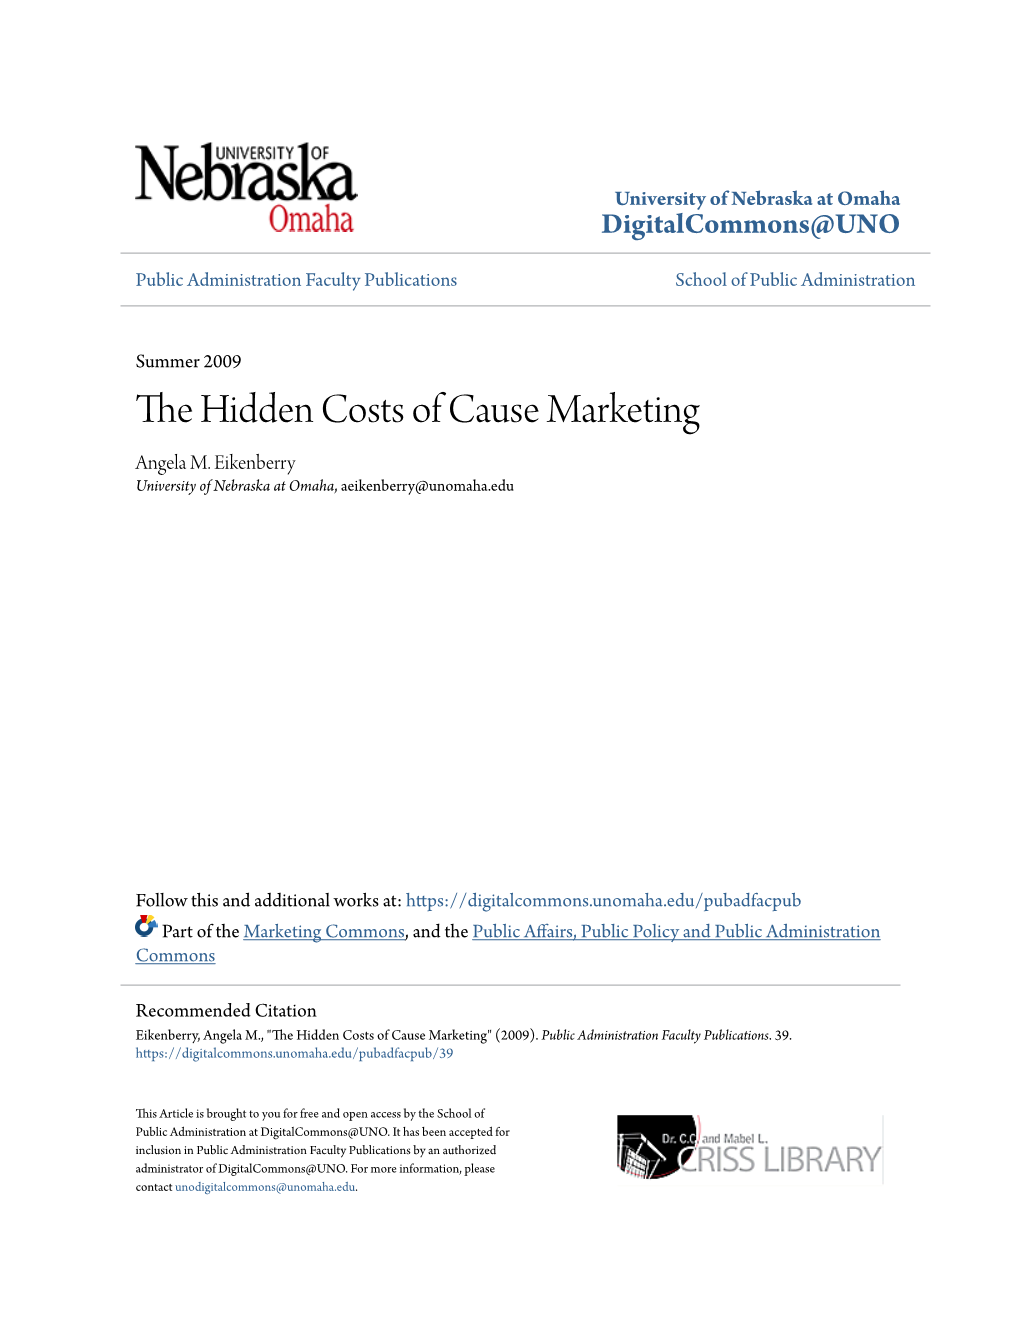 The Hidden Costs of Cause Marketing